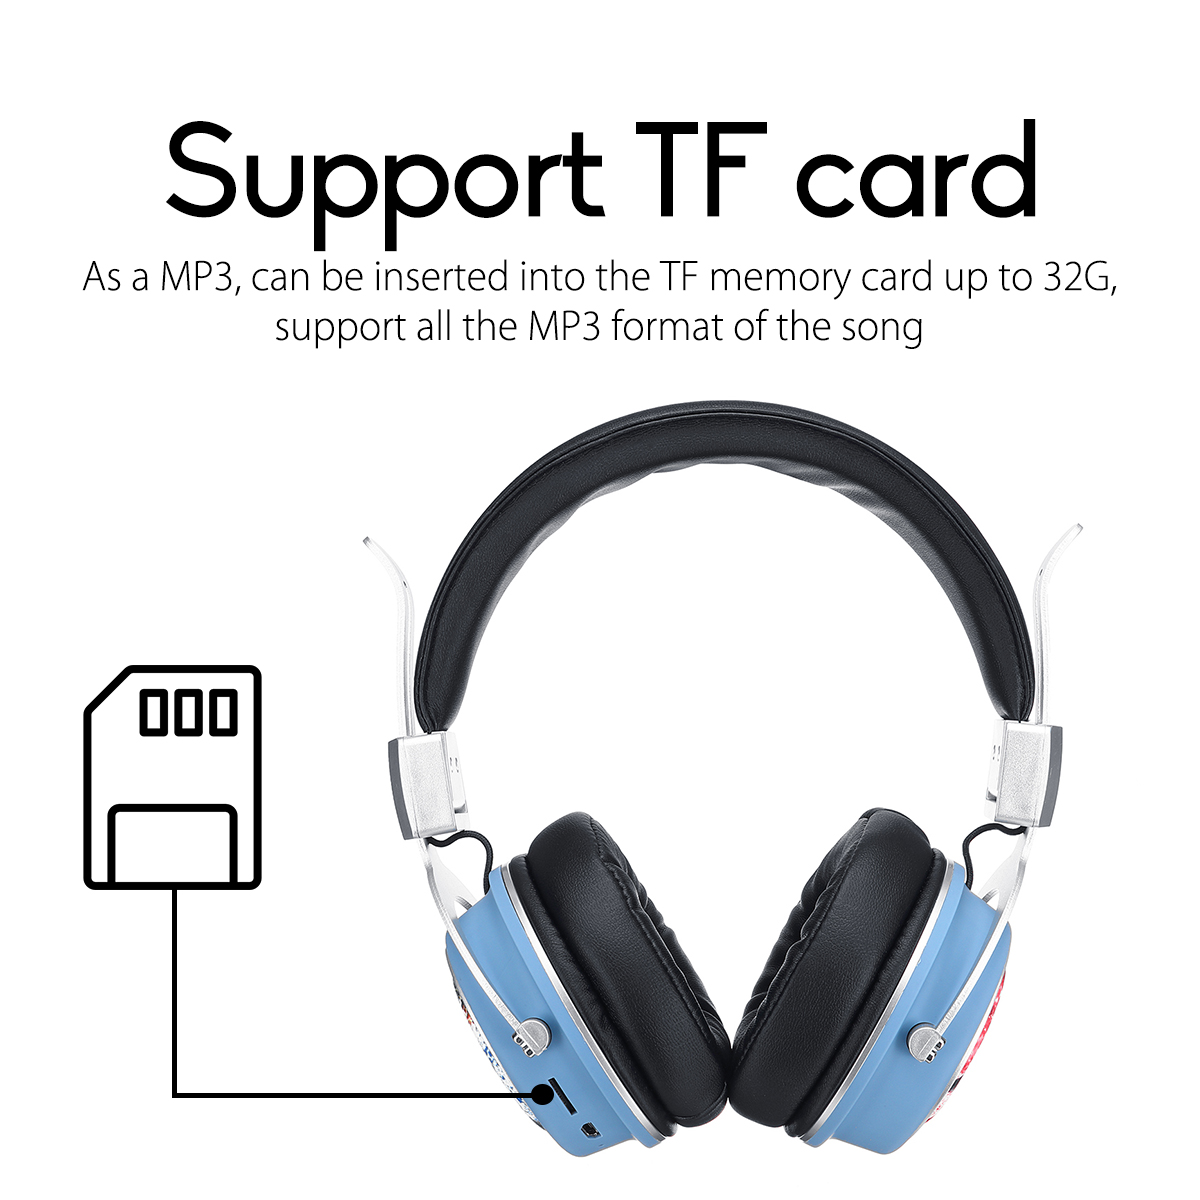 MH5-Wireless-bluetooth-50-Headphone-Foldable-Pattern-3D-Stereo-TF-Card-AUX-Headphone-with-Mic-1477112-6